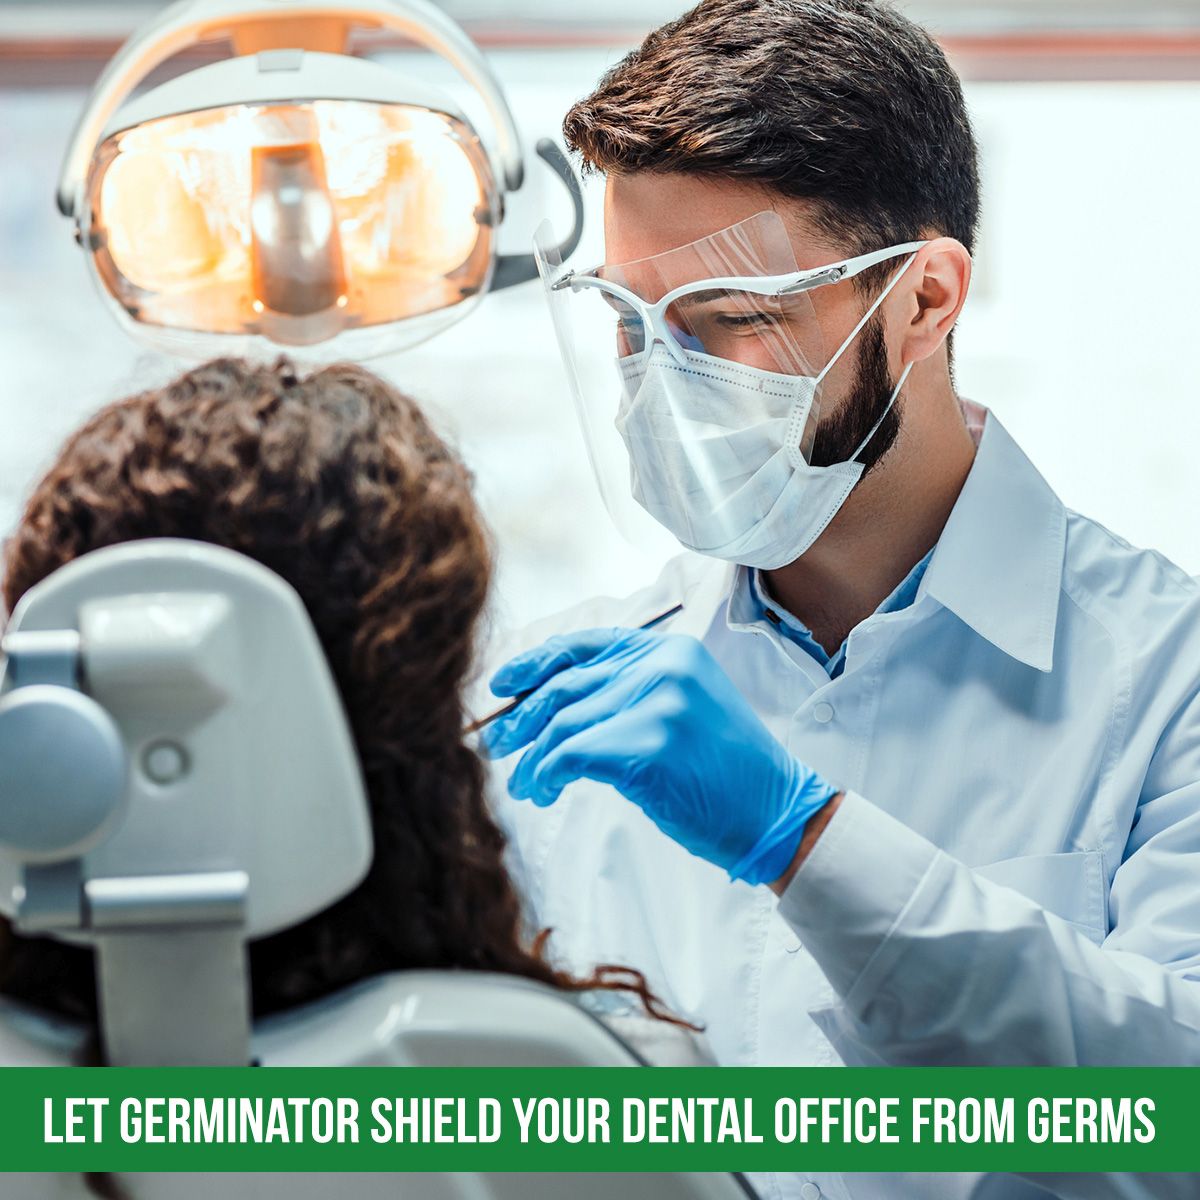 Let Germinator Shield Your Dental Office From Germs